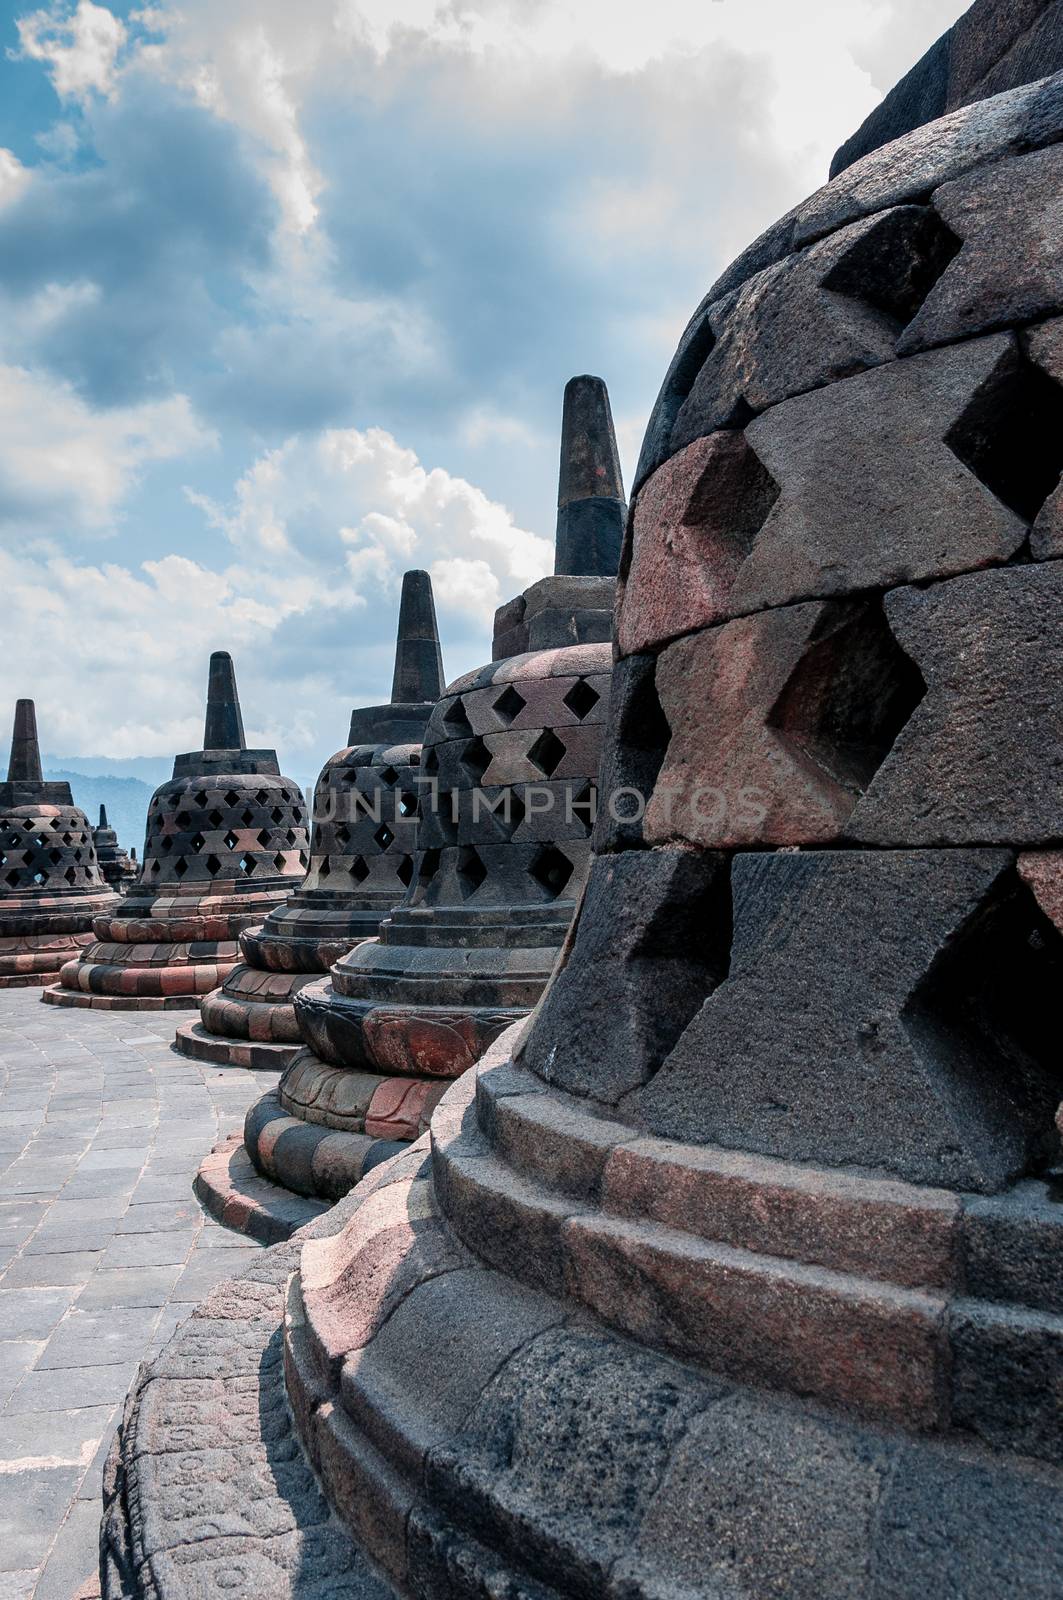 Stupa at Borobudur on a cloudy day in Indonesia